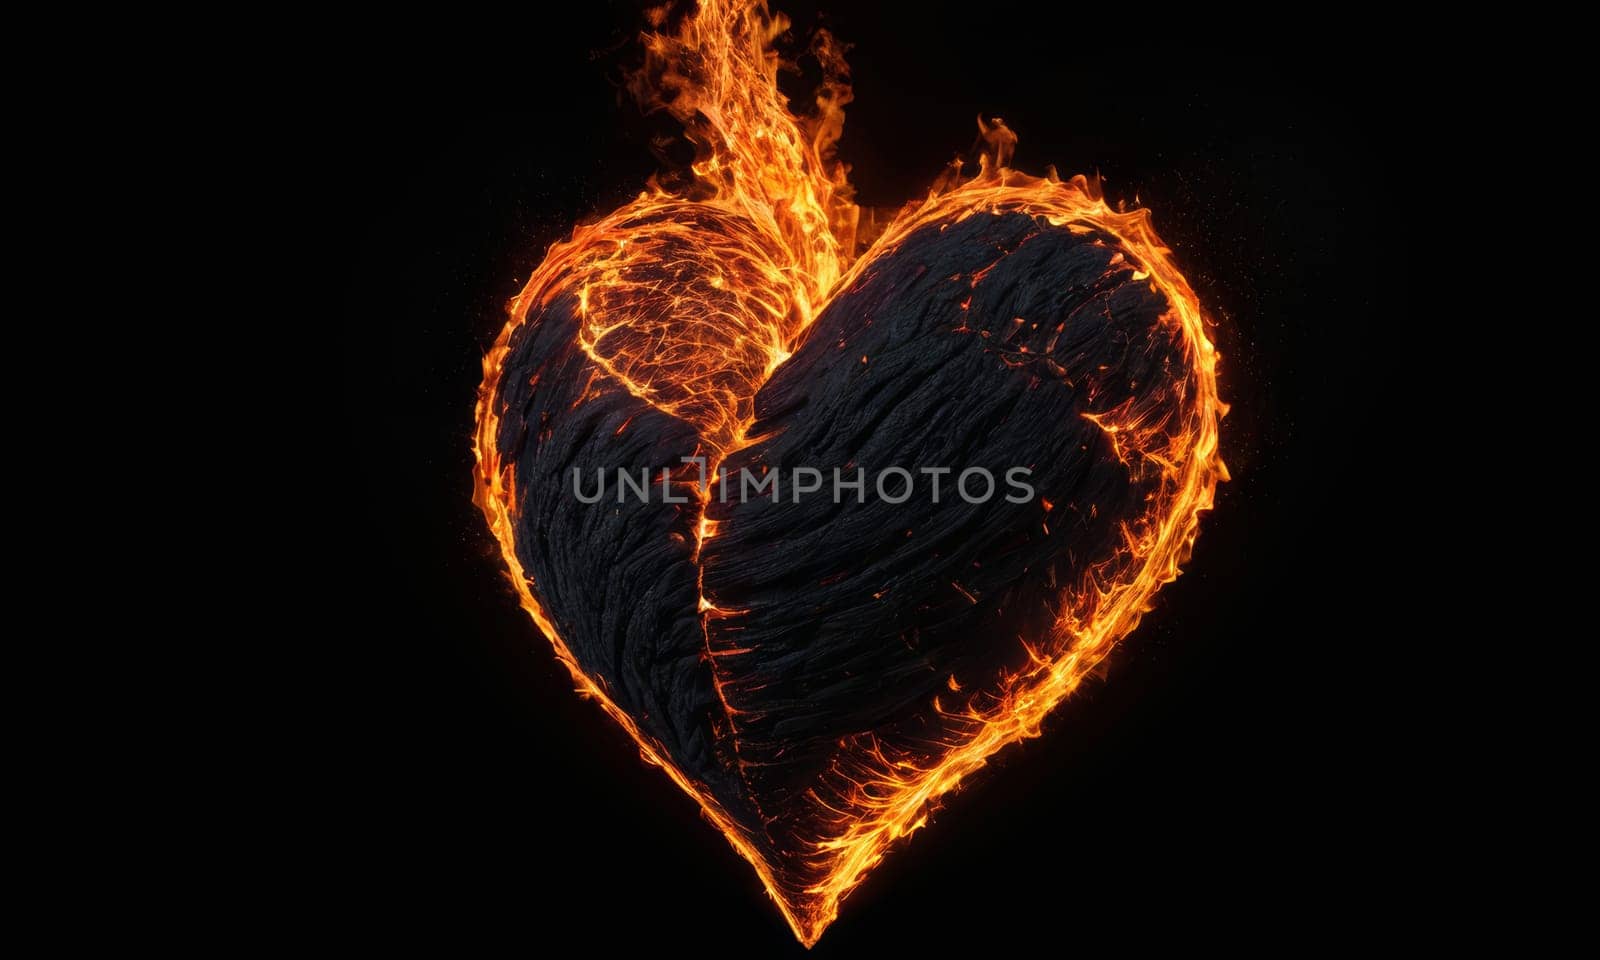 A heart ablaze with intense flames symbolizes passionate love. The dark backdrop accentuates the glowing embers and intricate details of the fiery heart. Ideal for expressing deep affection or romantic sentiments.